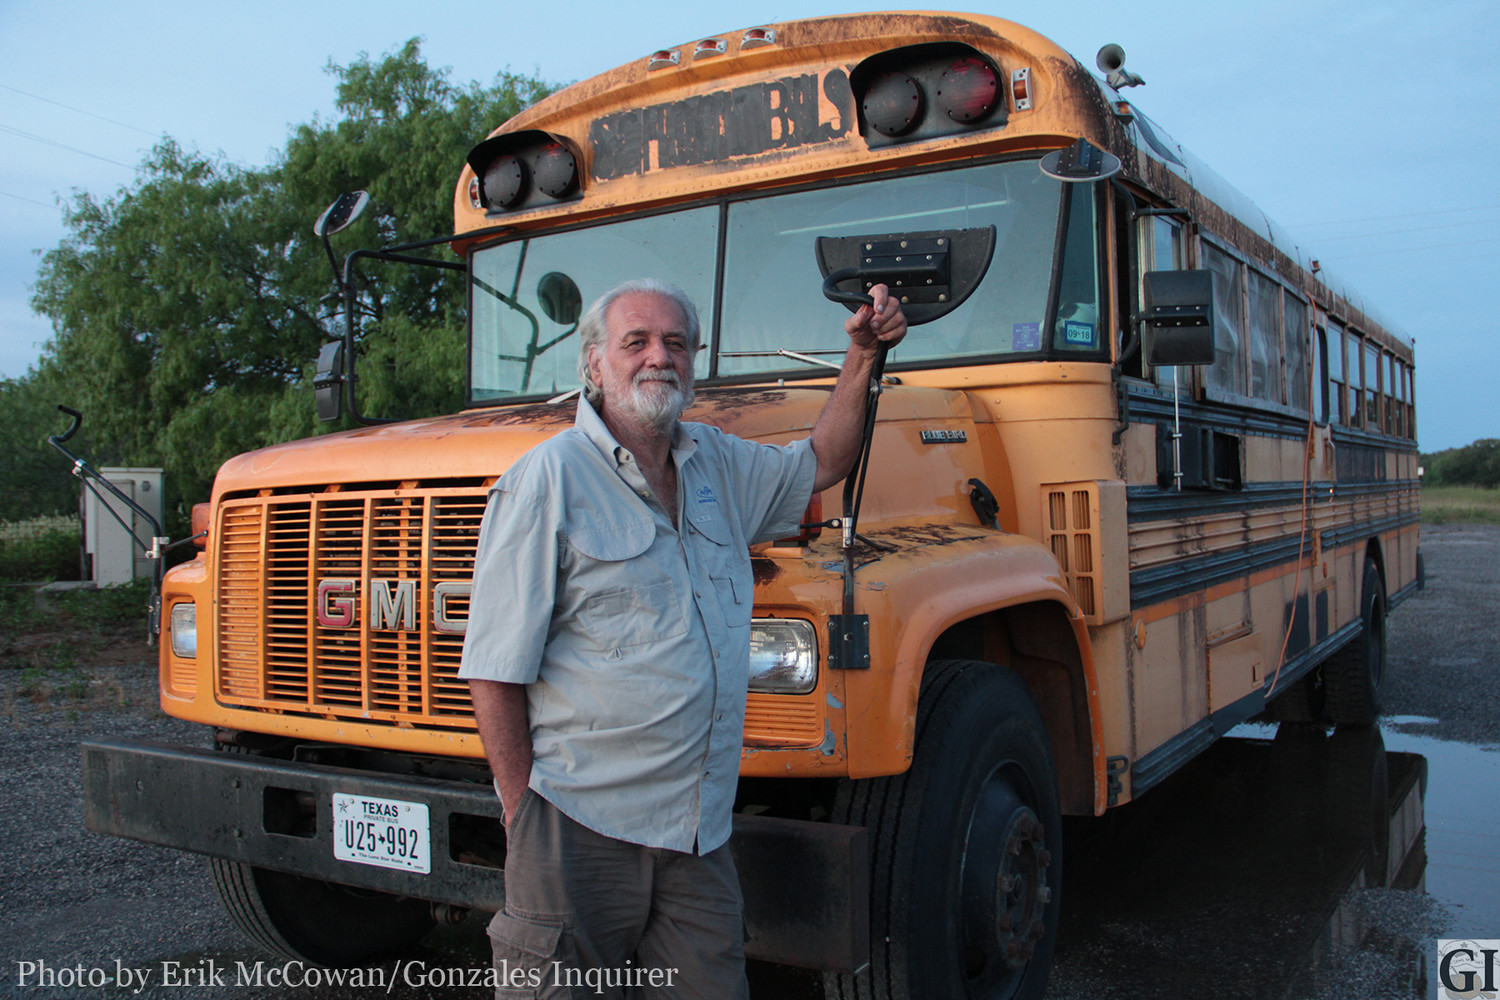 A lot of people have noticed this older decommissioned school bus parked at various places around town, enough so to call local police. Its owner, Jay H. Burns, doesn't know what all the commotion is about.